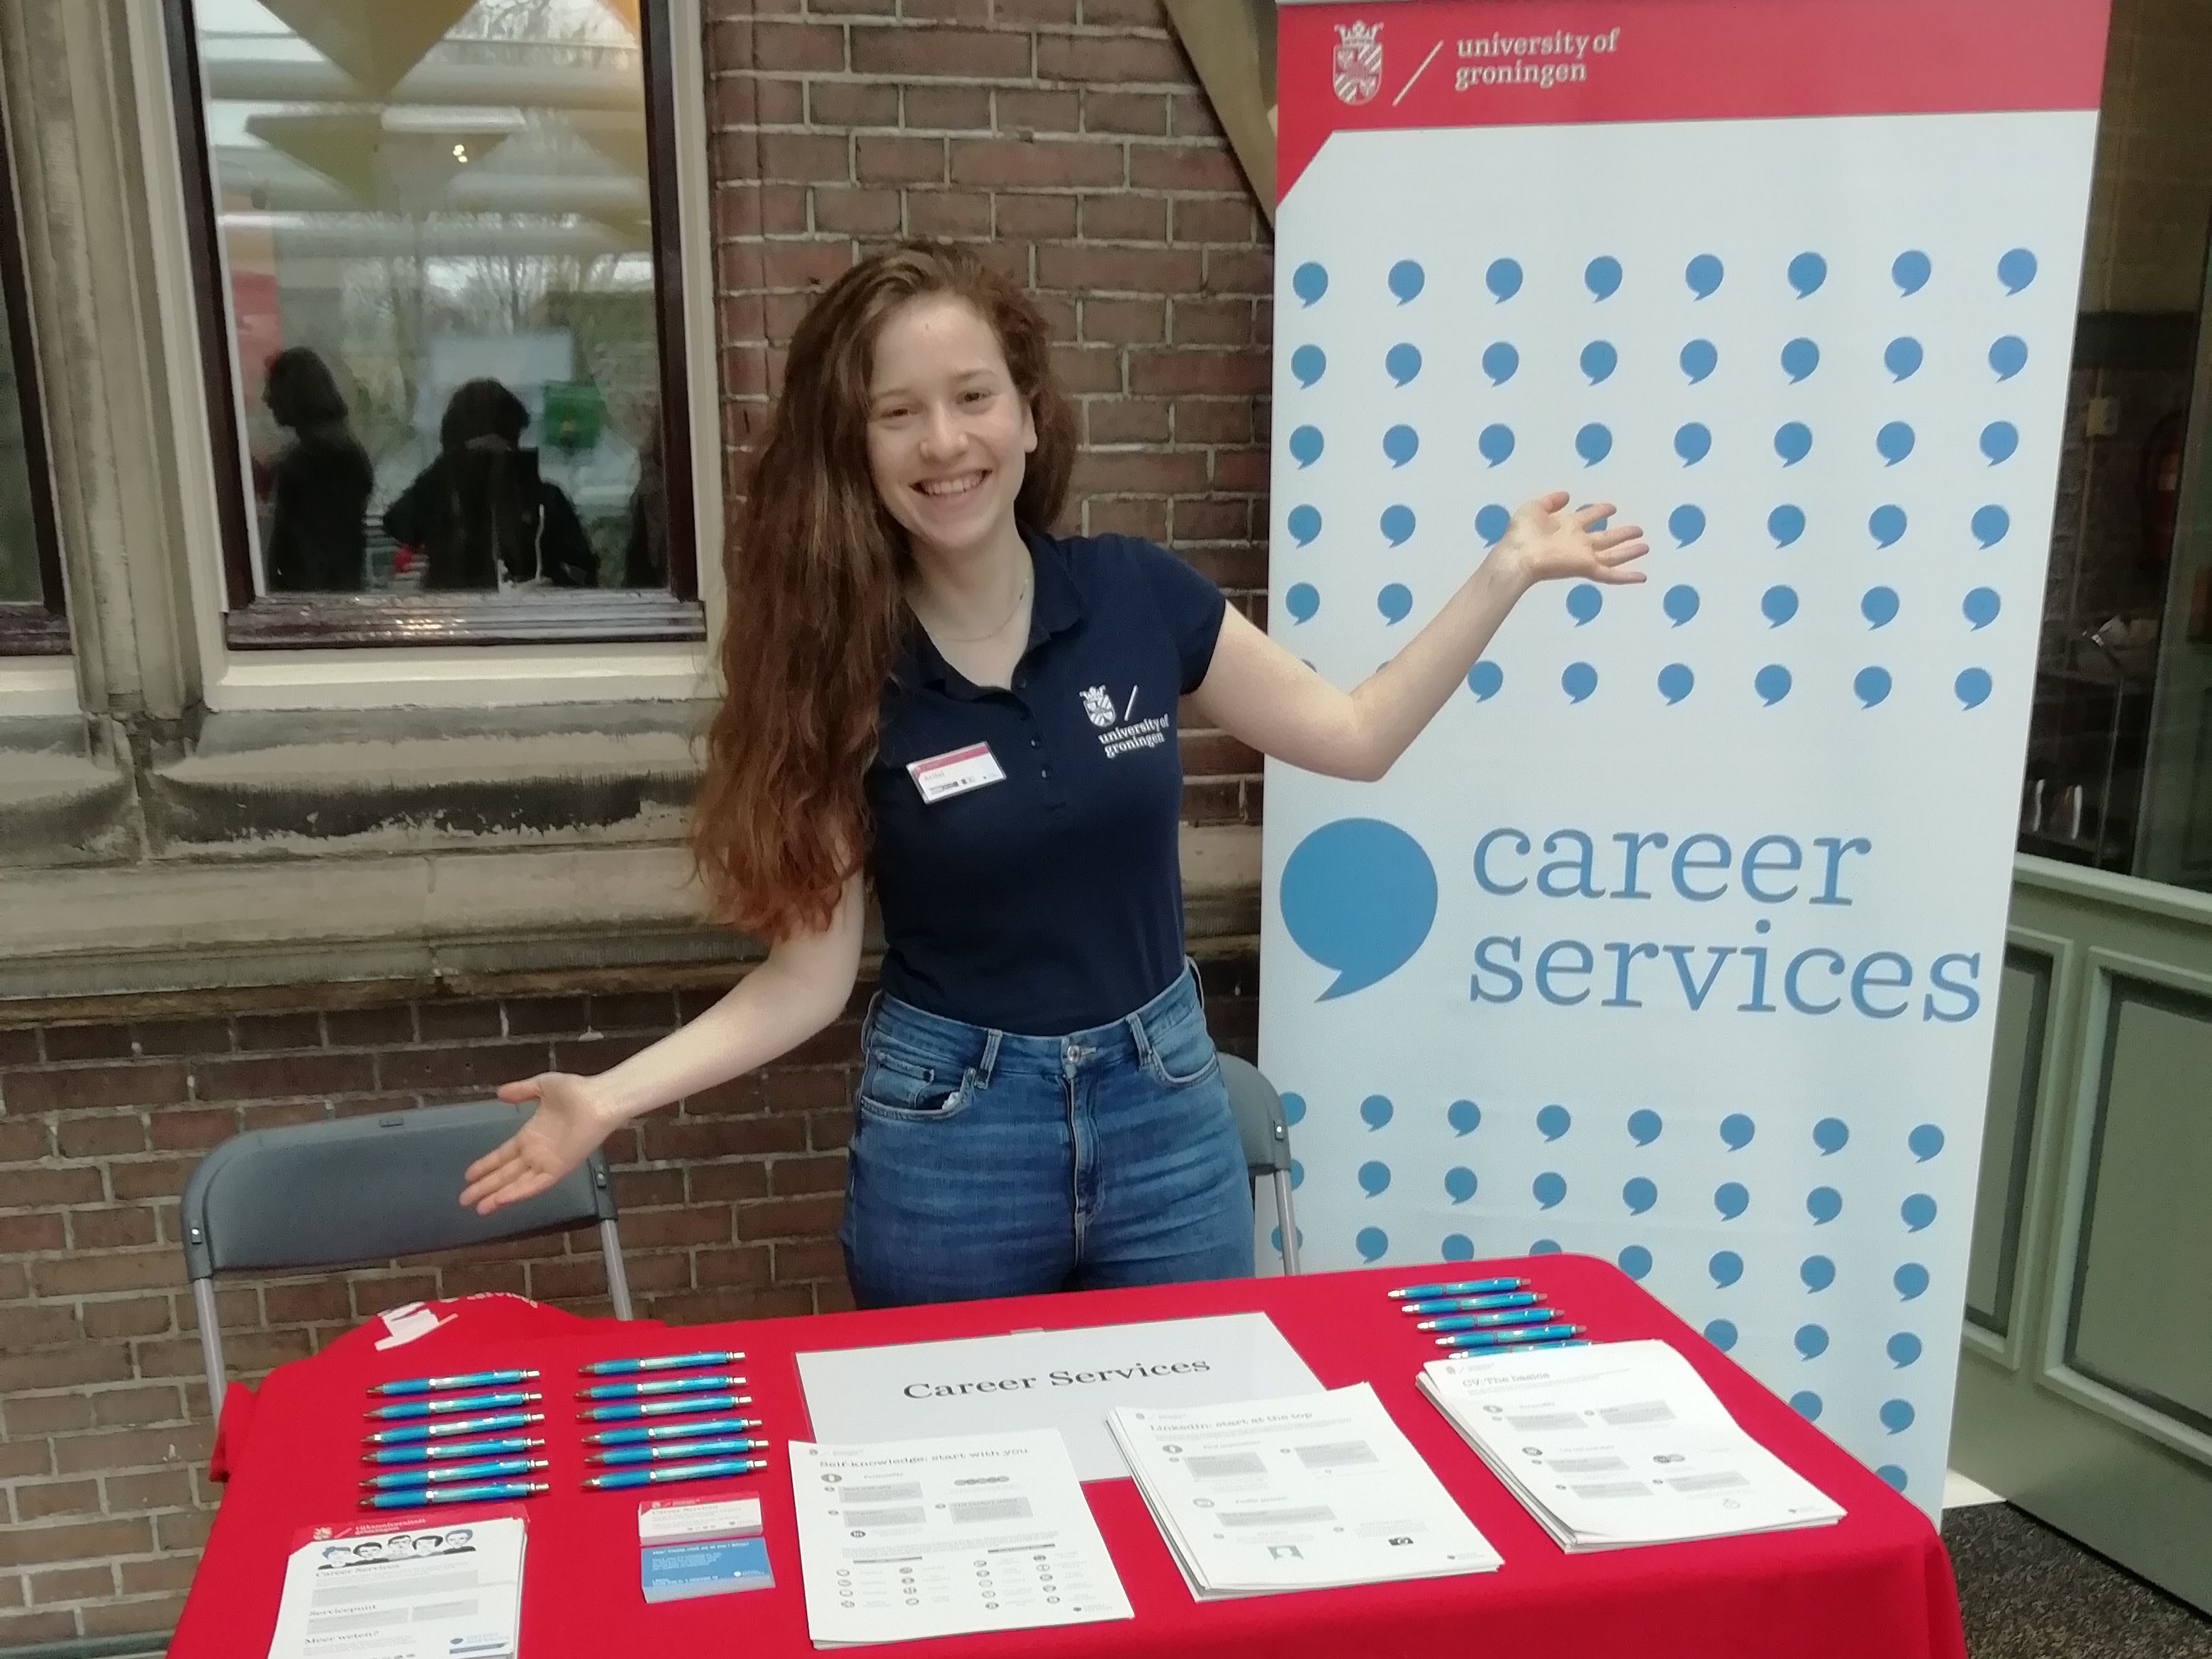 Every UG student should know (and use!) Career Services. Have you visited them before?